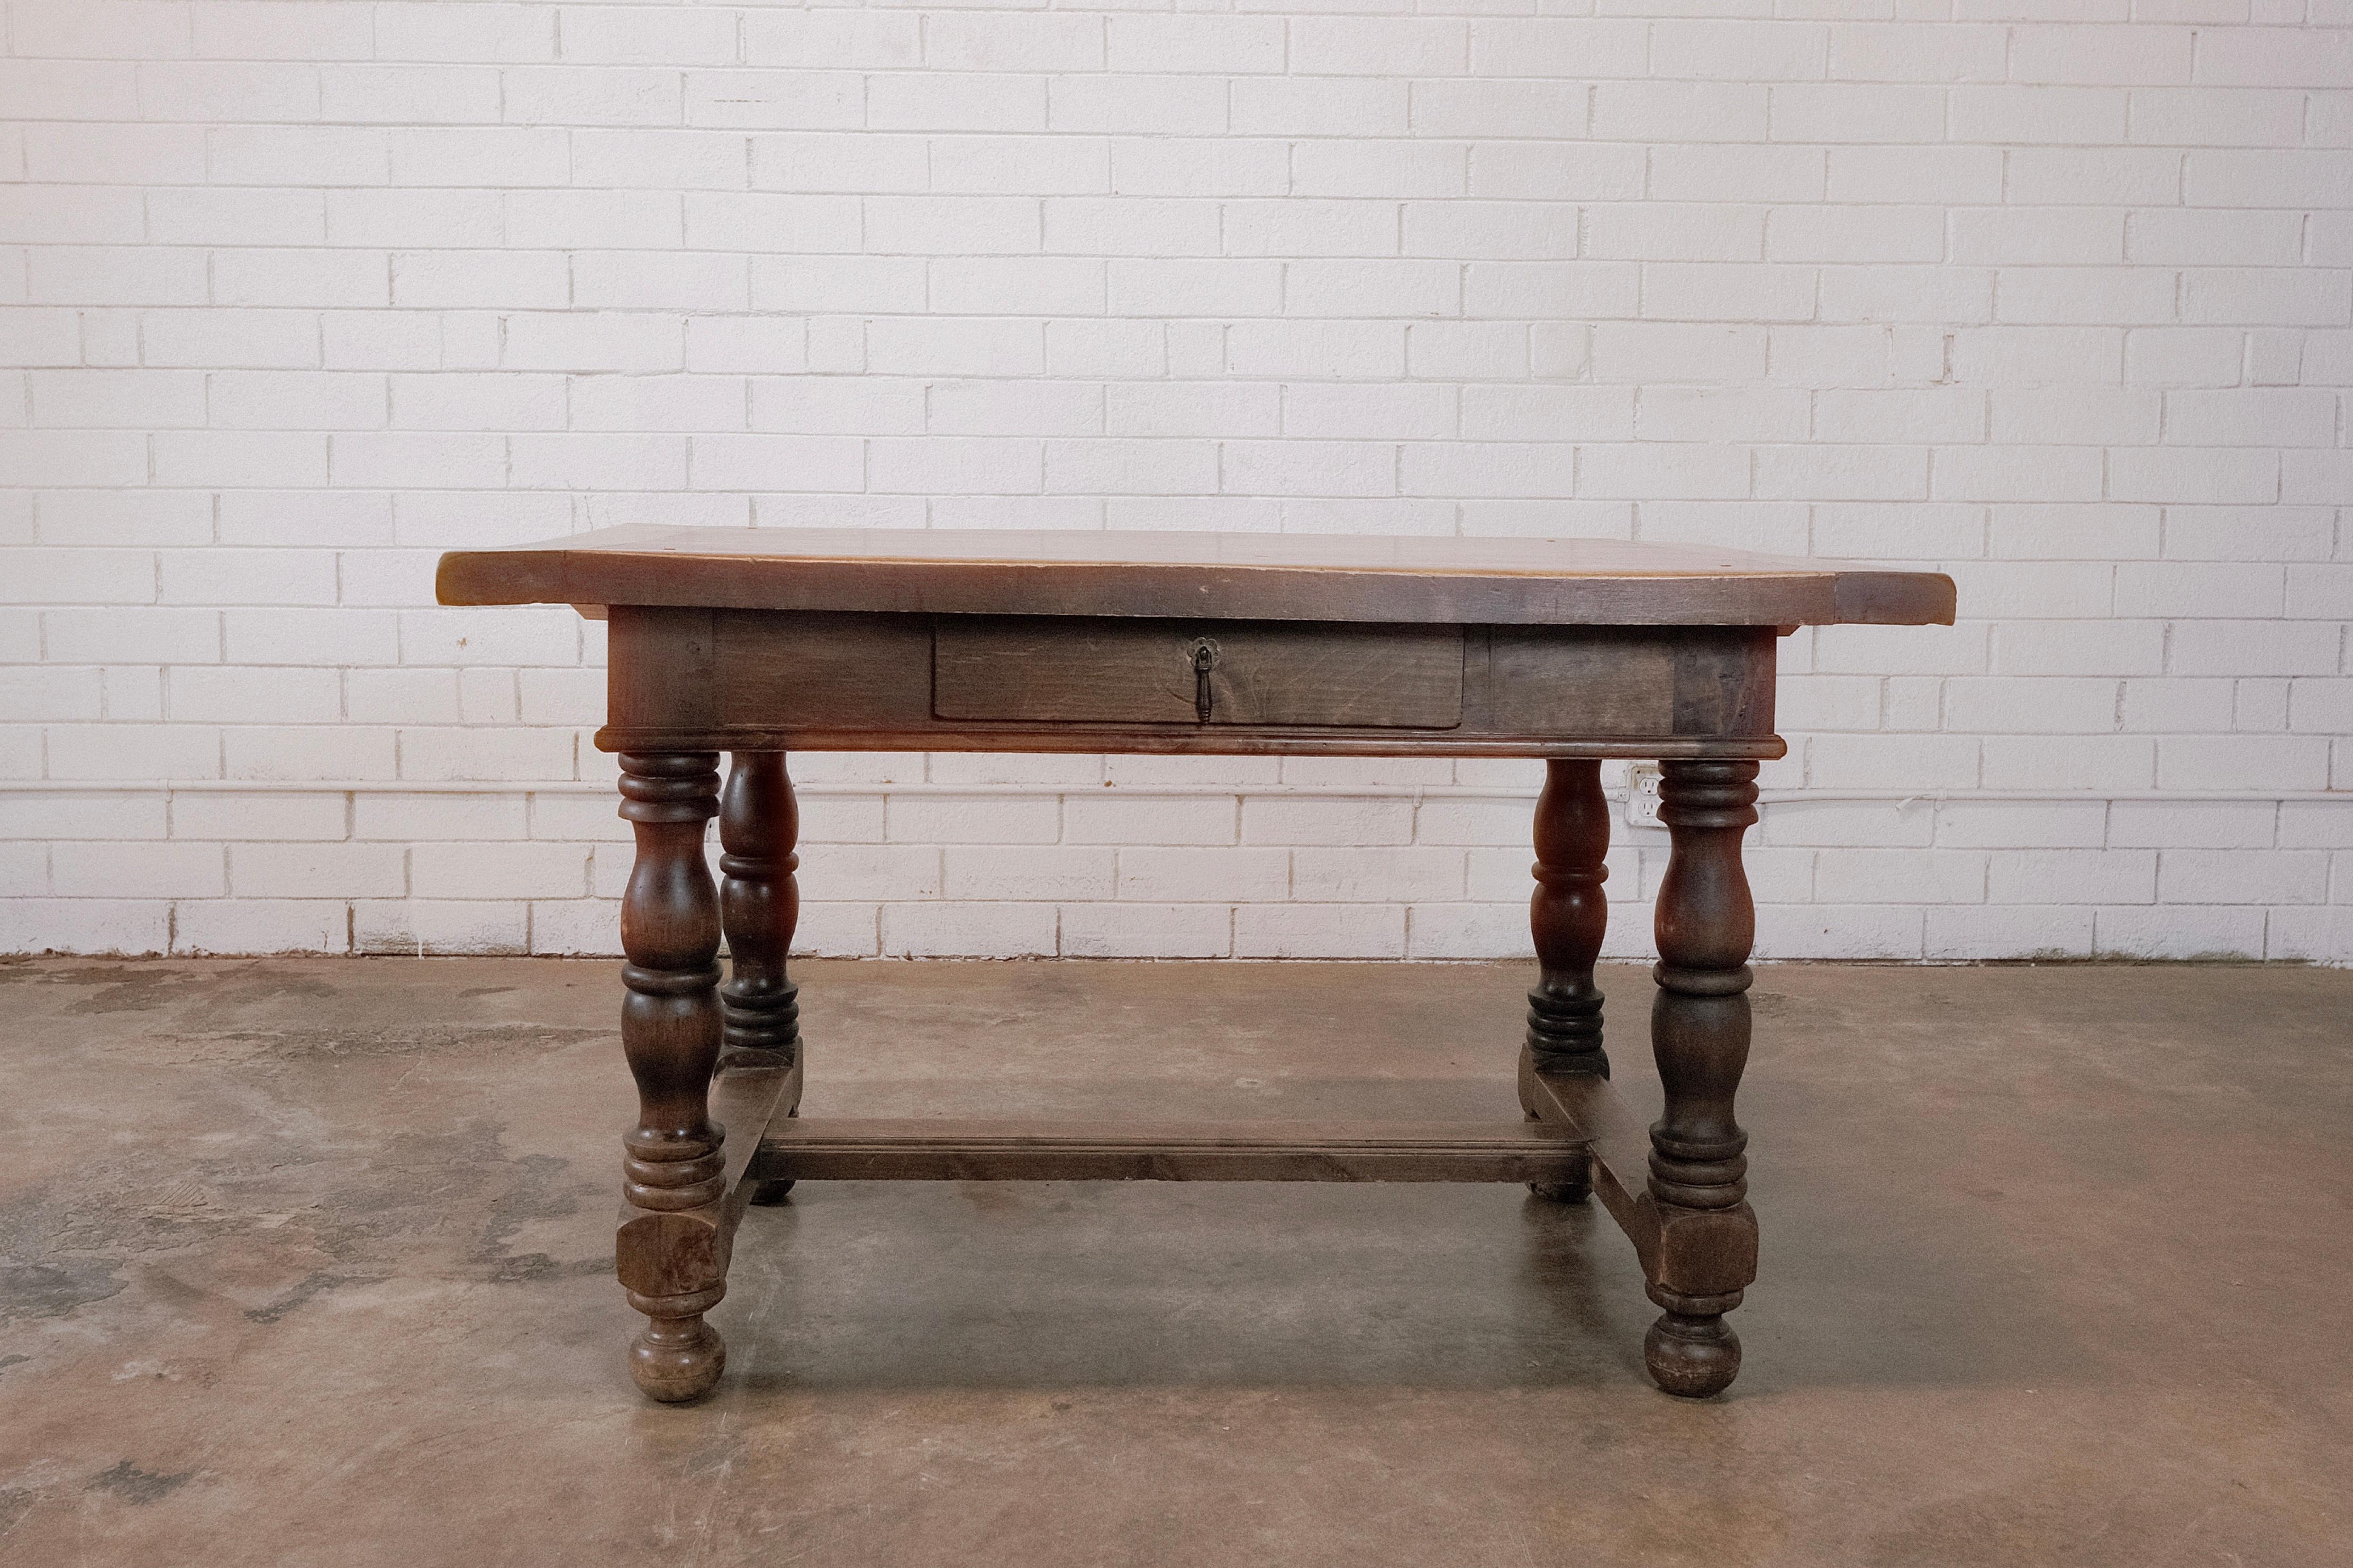 Elegance and authenticity meet in this Dutch Renaissance oak table, where history and craftsmanship unite. 'Bolpoten' legs and a sturdy stretcher base exemplify timeless design and durability. A true masterpiece for those who appreciate heritage and